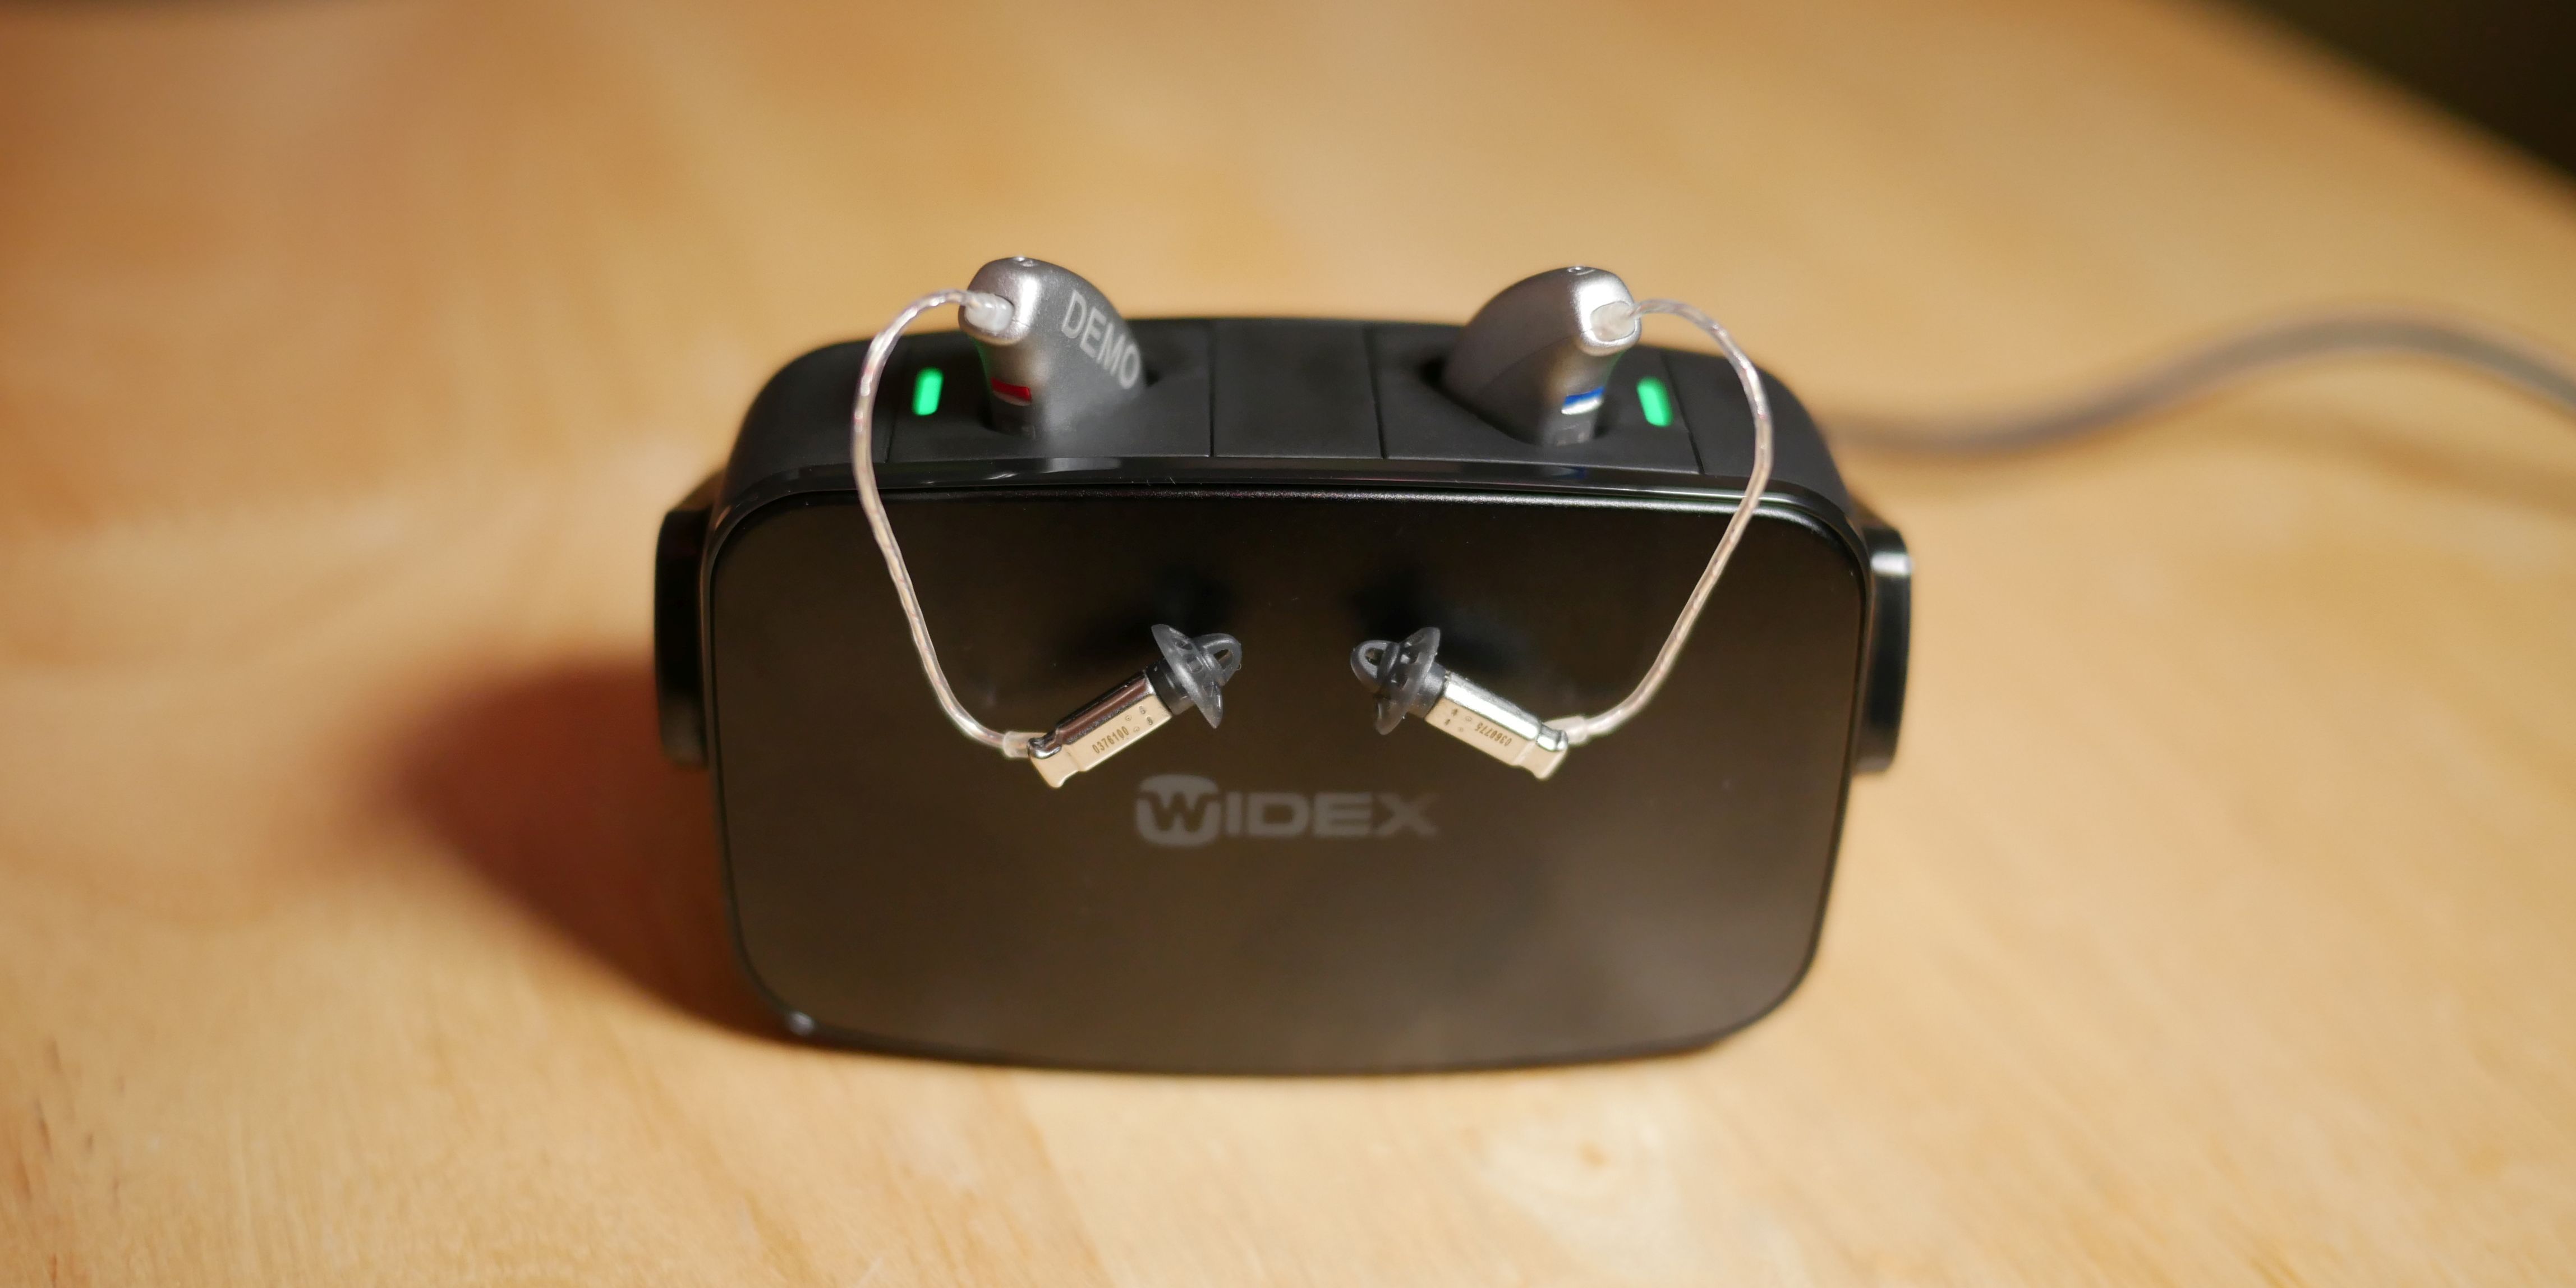 Widex MOMENT hearing aids charging